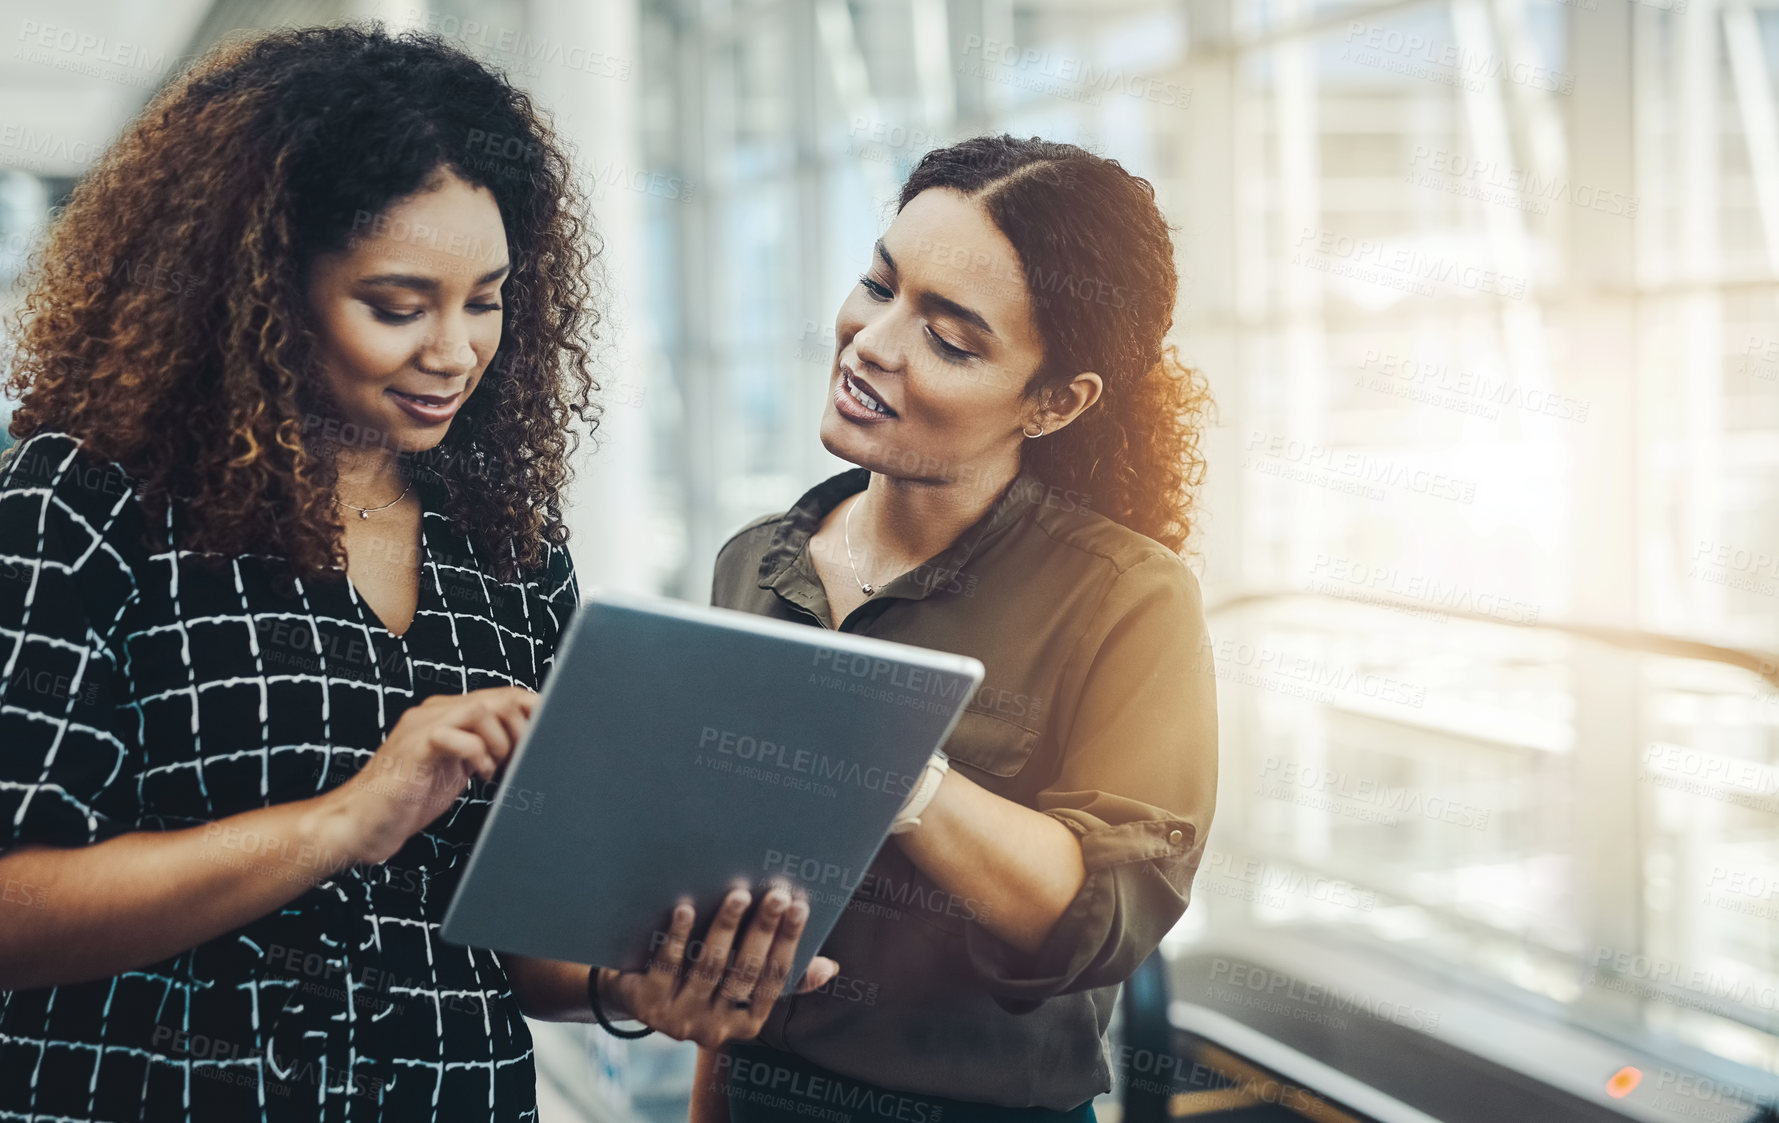 Buy stock photo Cropped shot of two attractive businesswomen using a digital tablet together while standing in a modern workplace